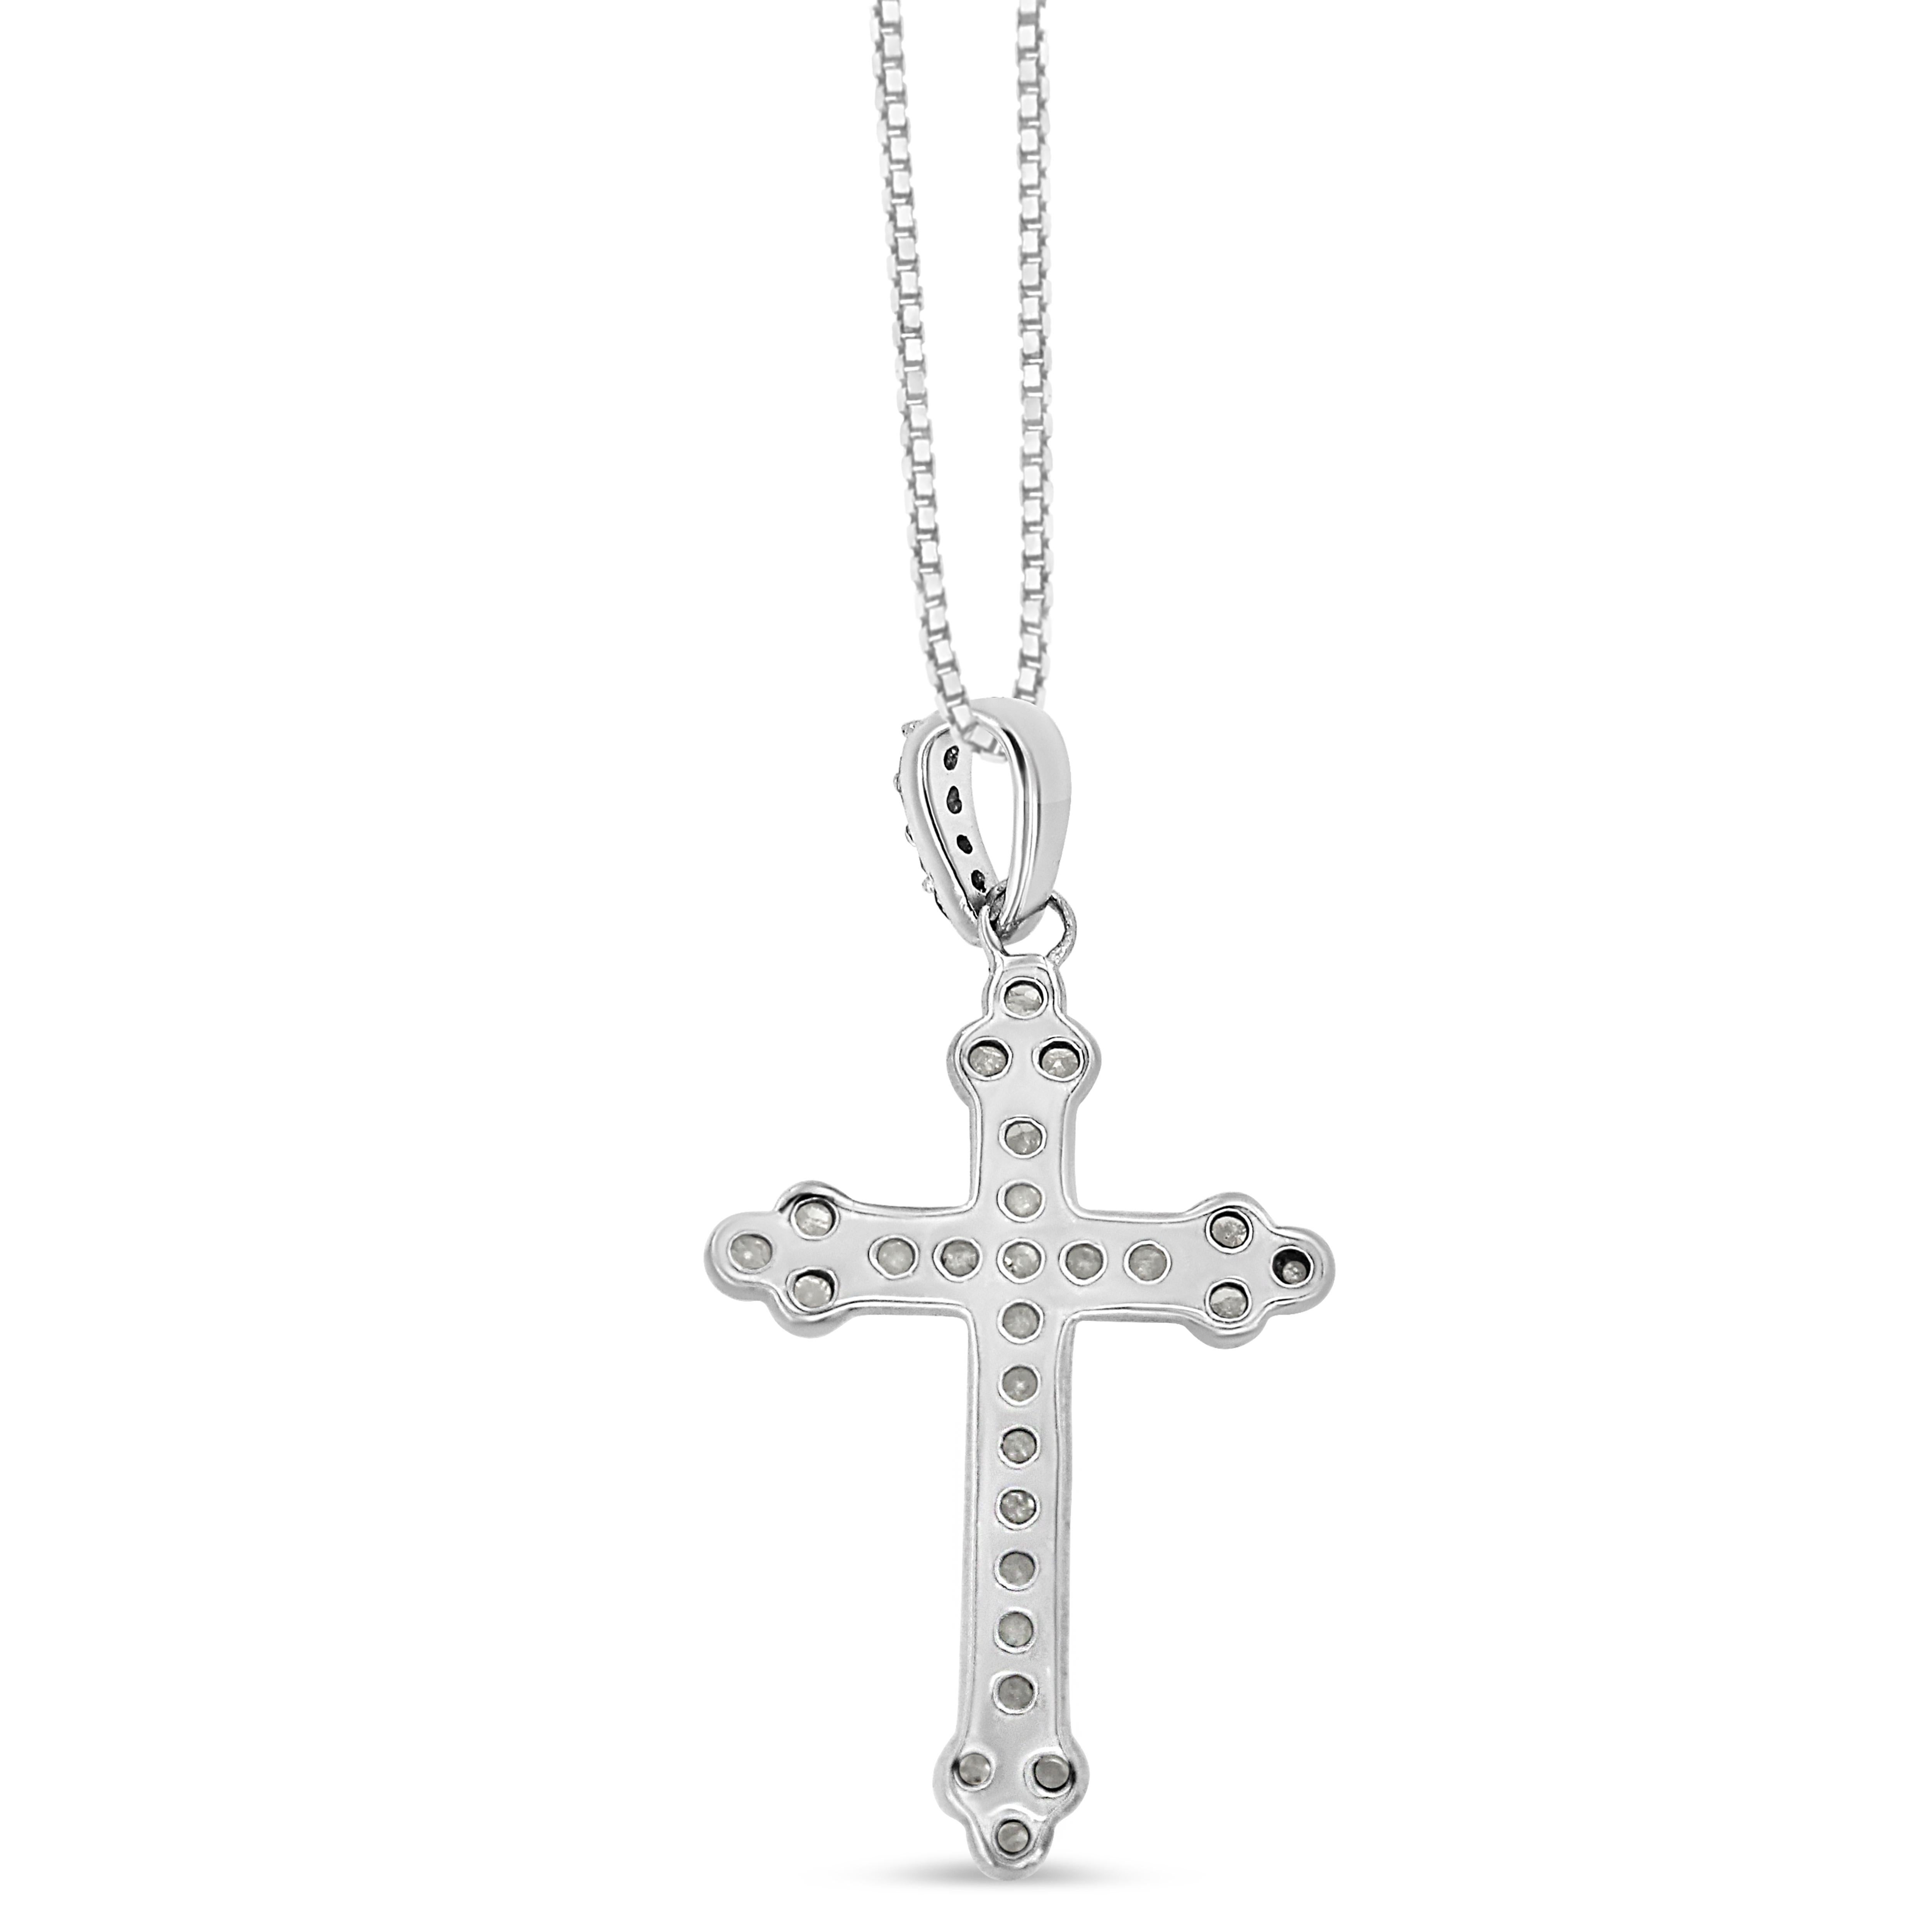 Celebrate your inner spirituality with this art-deco diamond cross pendant. This necklace is embellished with a 1/4 cttw of natural, round-cut diamonds. The cross is designed with extra flair as a trio of diamonds are at each end. The prong-set